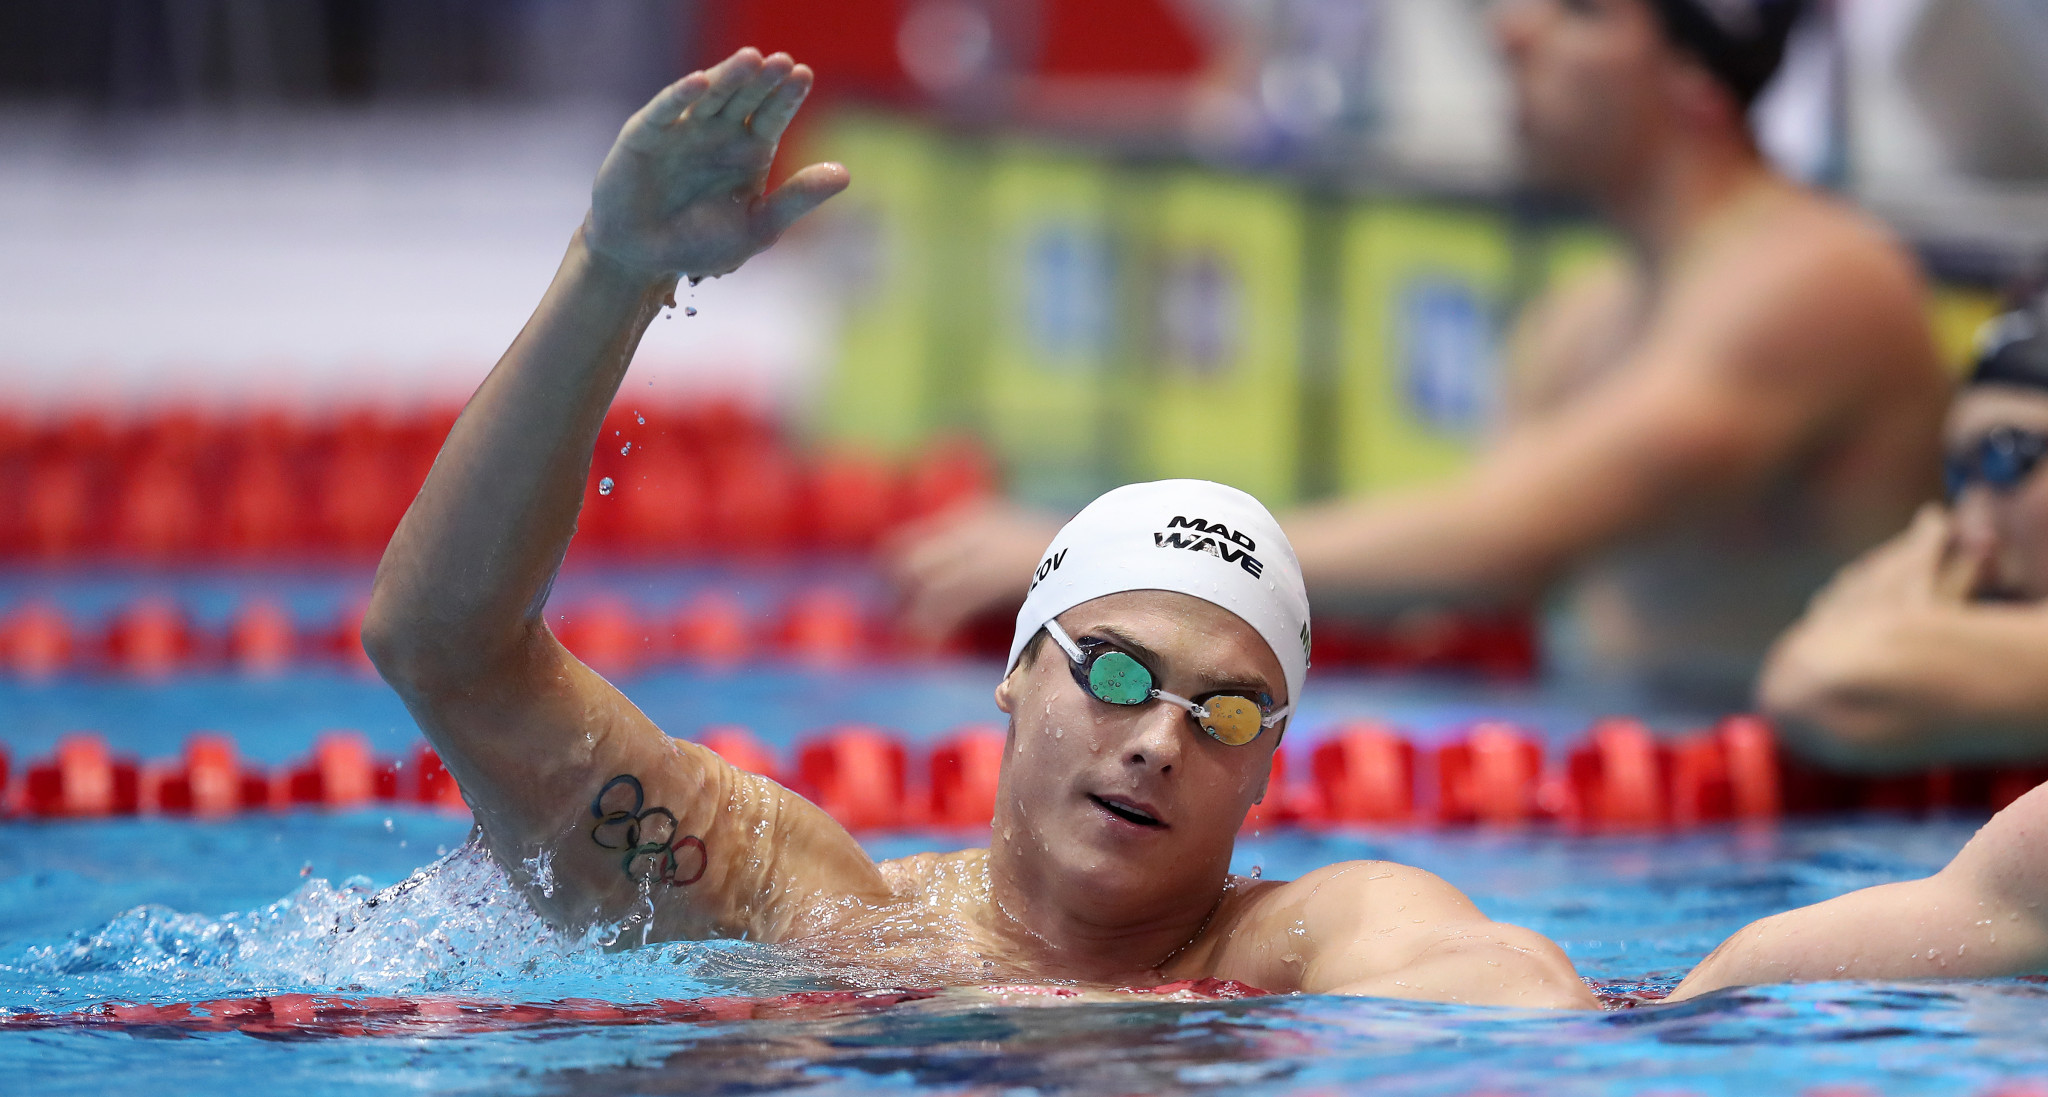 Vladimir Morozov claimed another two FINA World Cup winsin Berlin ©Getty Images